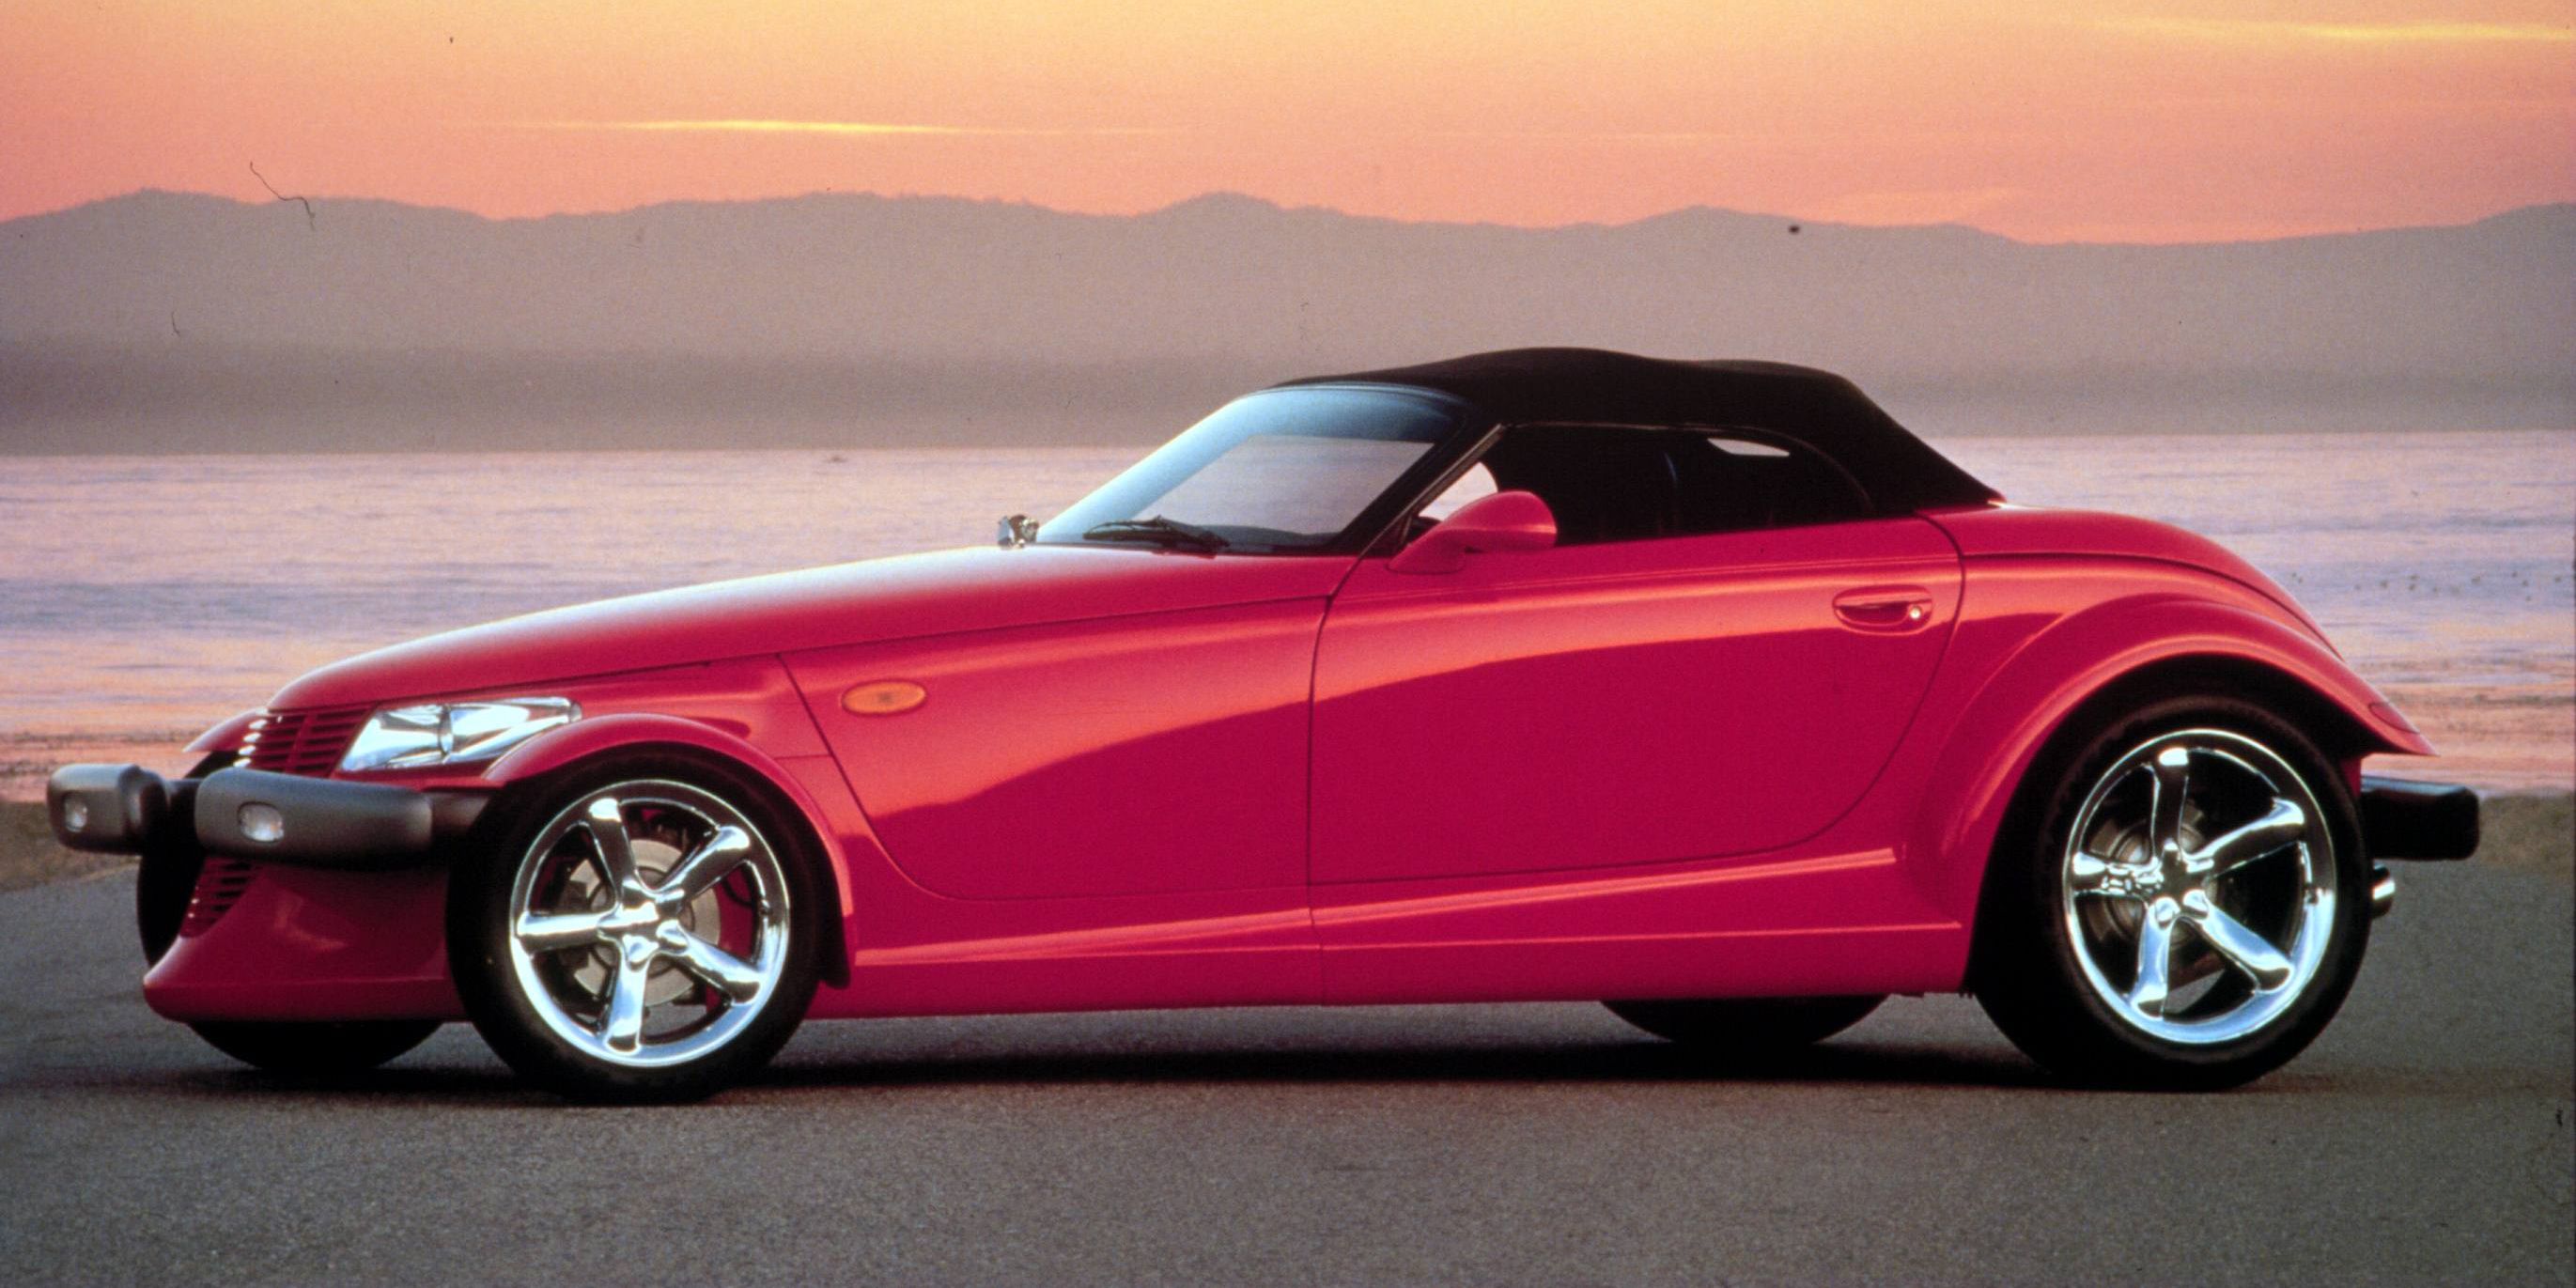 Plymouth prowler pictures